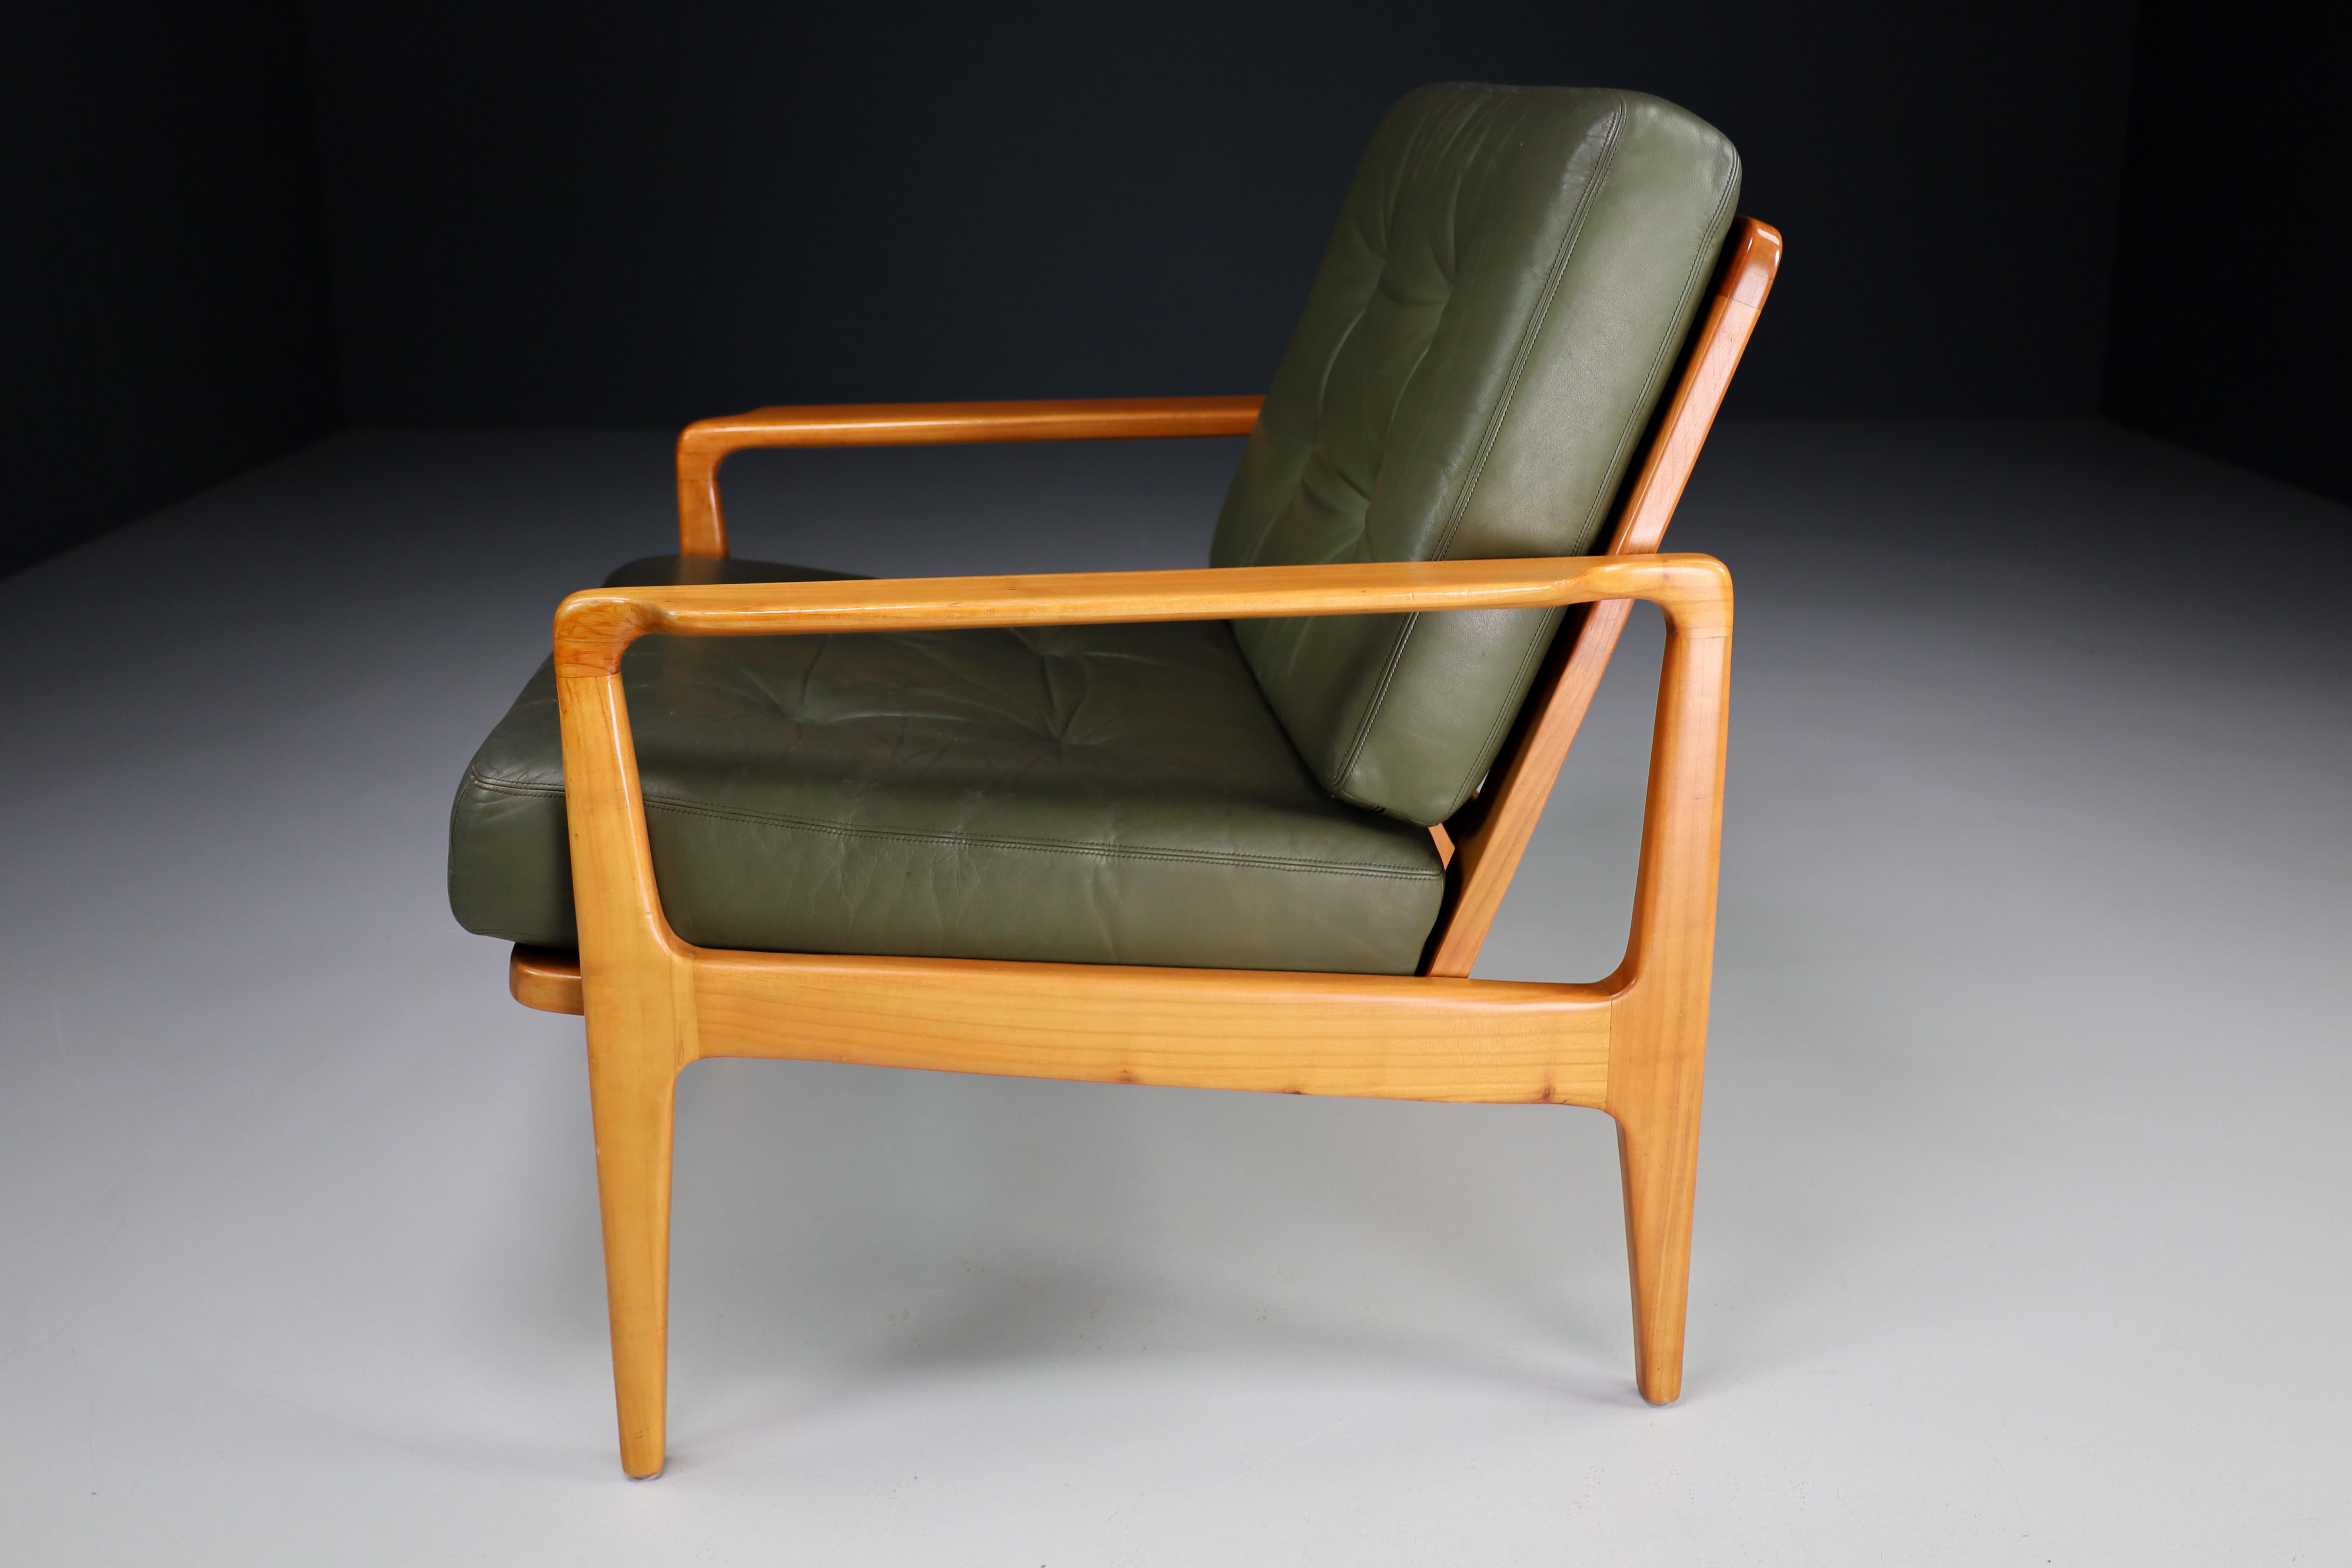 20th Century Midcentury Danish Lounge Chairs by Arne Wahl Iversen in Green Leather, 1960s For Sale